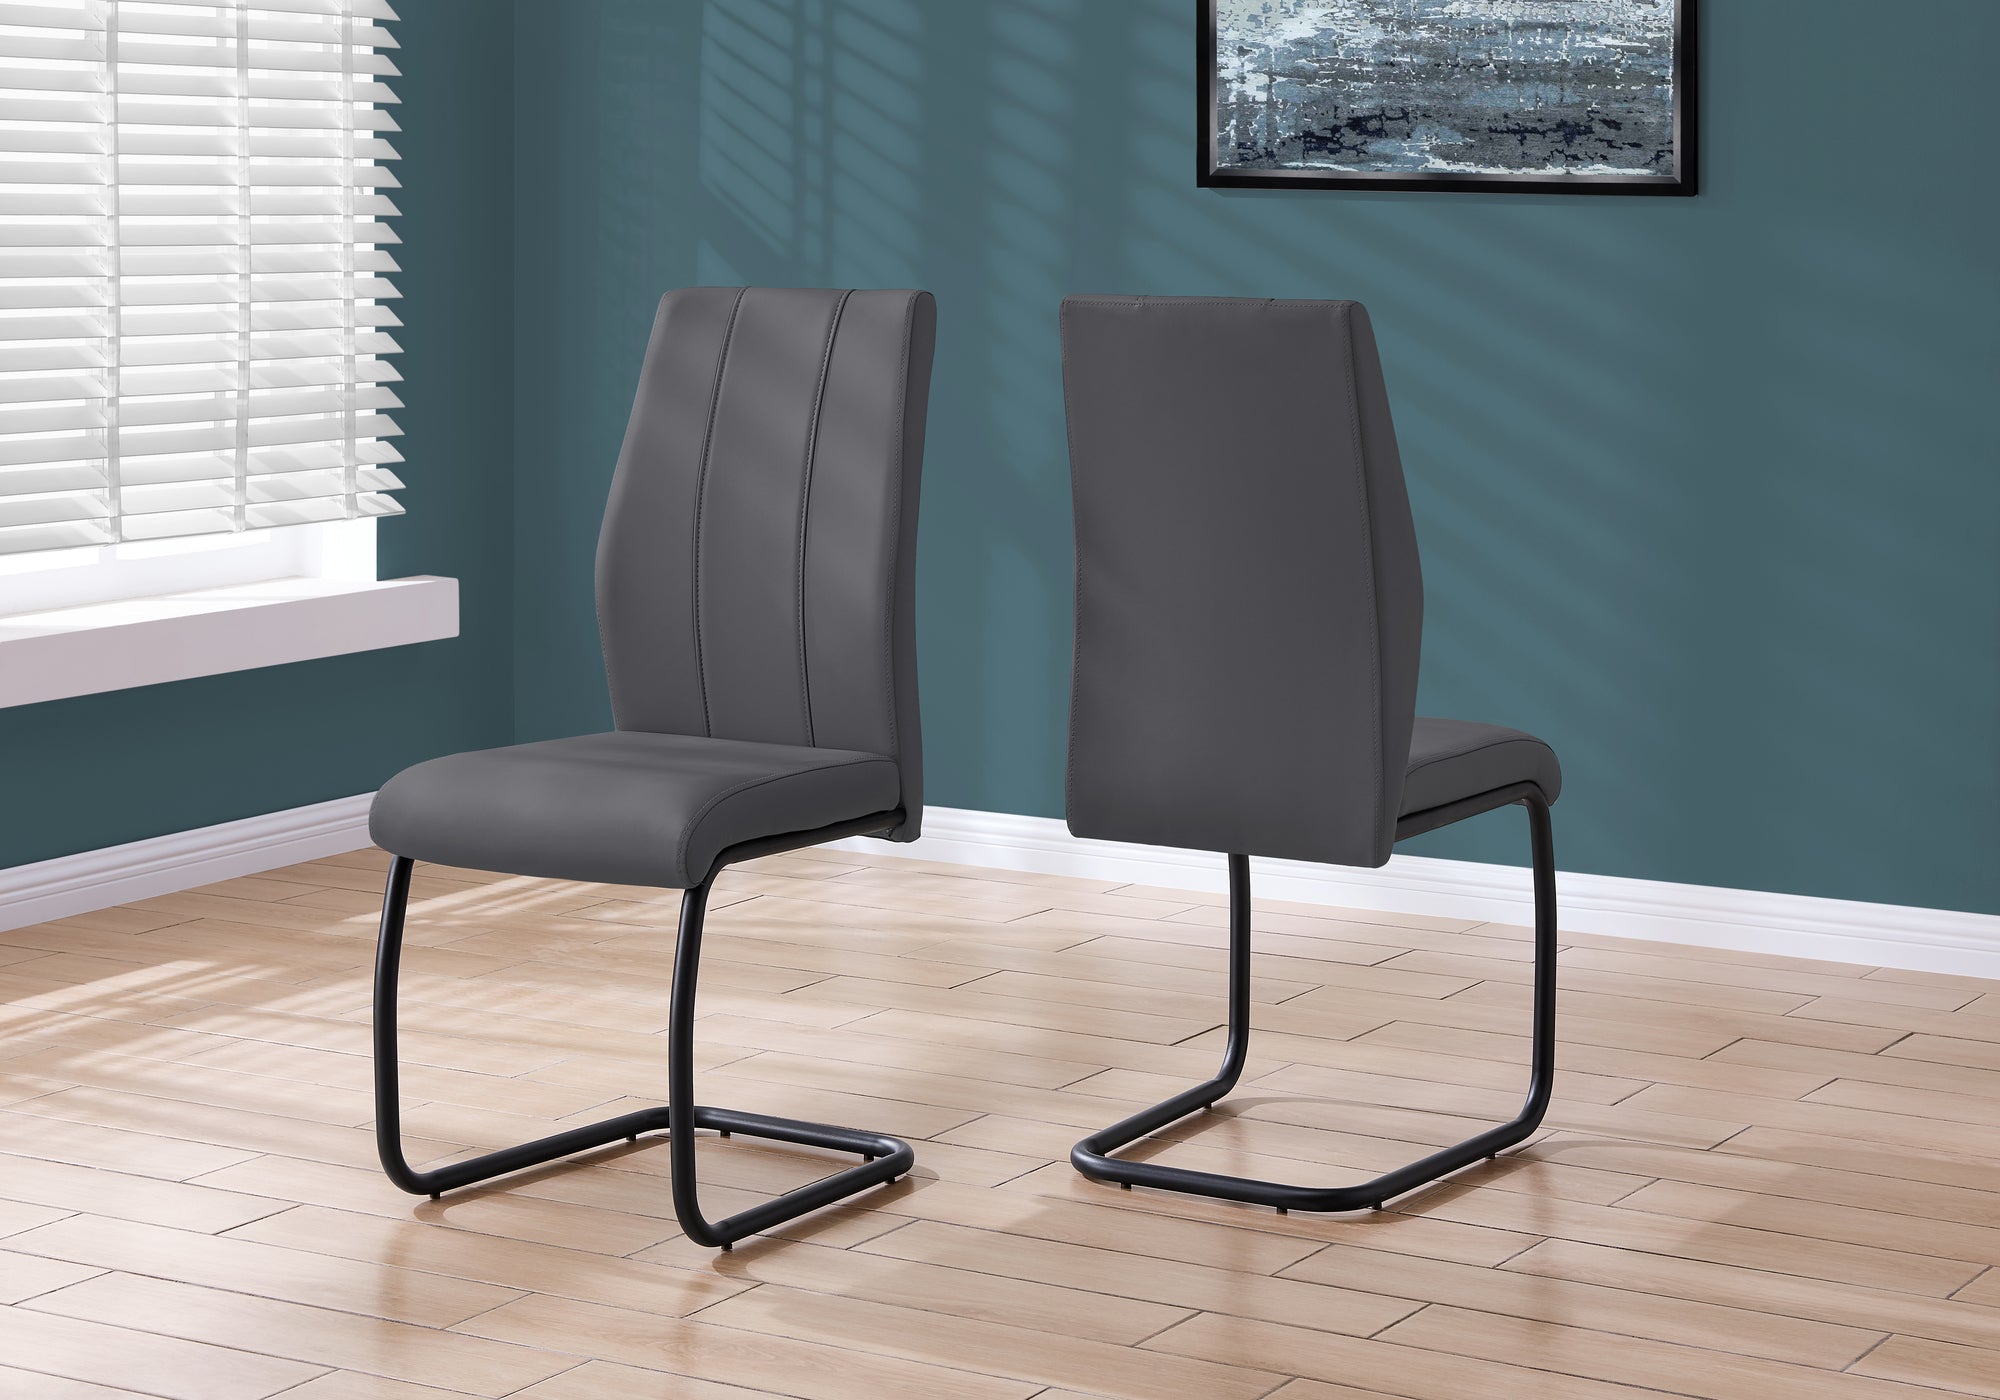 MN-641124    Dining Chair, Set Of 2, Side, Pu Leather-Look, Upholstered, Metal Legs, Kitchen, Dining Room, Velvet, Metal Legs, Grey, Black, Contemporary, Modern